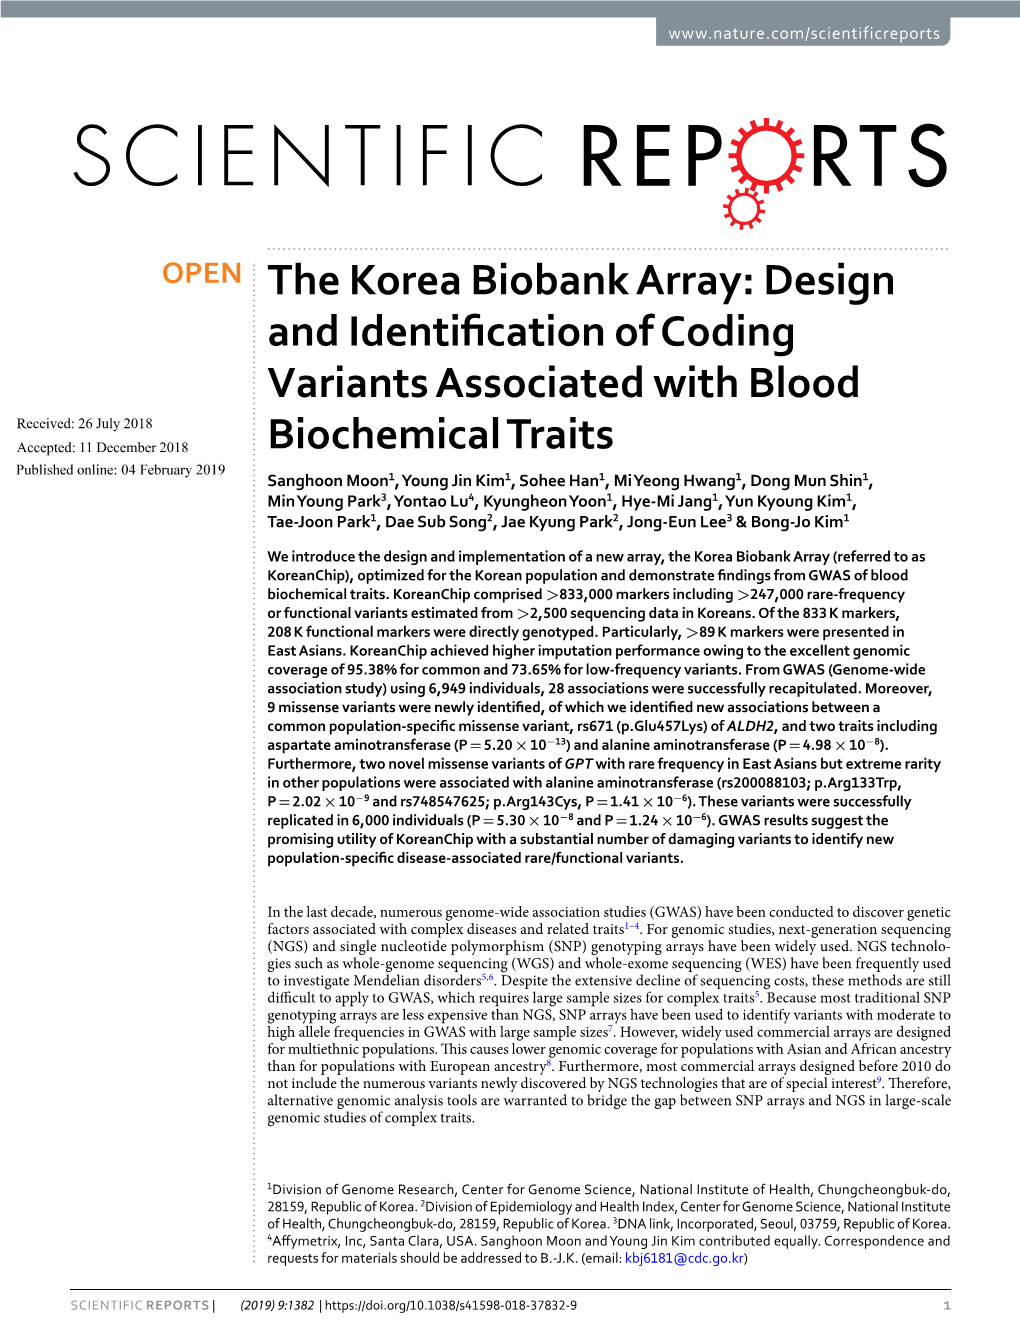 The Korea Biobank Array: Design and Identification of Coding Variants